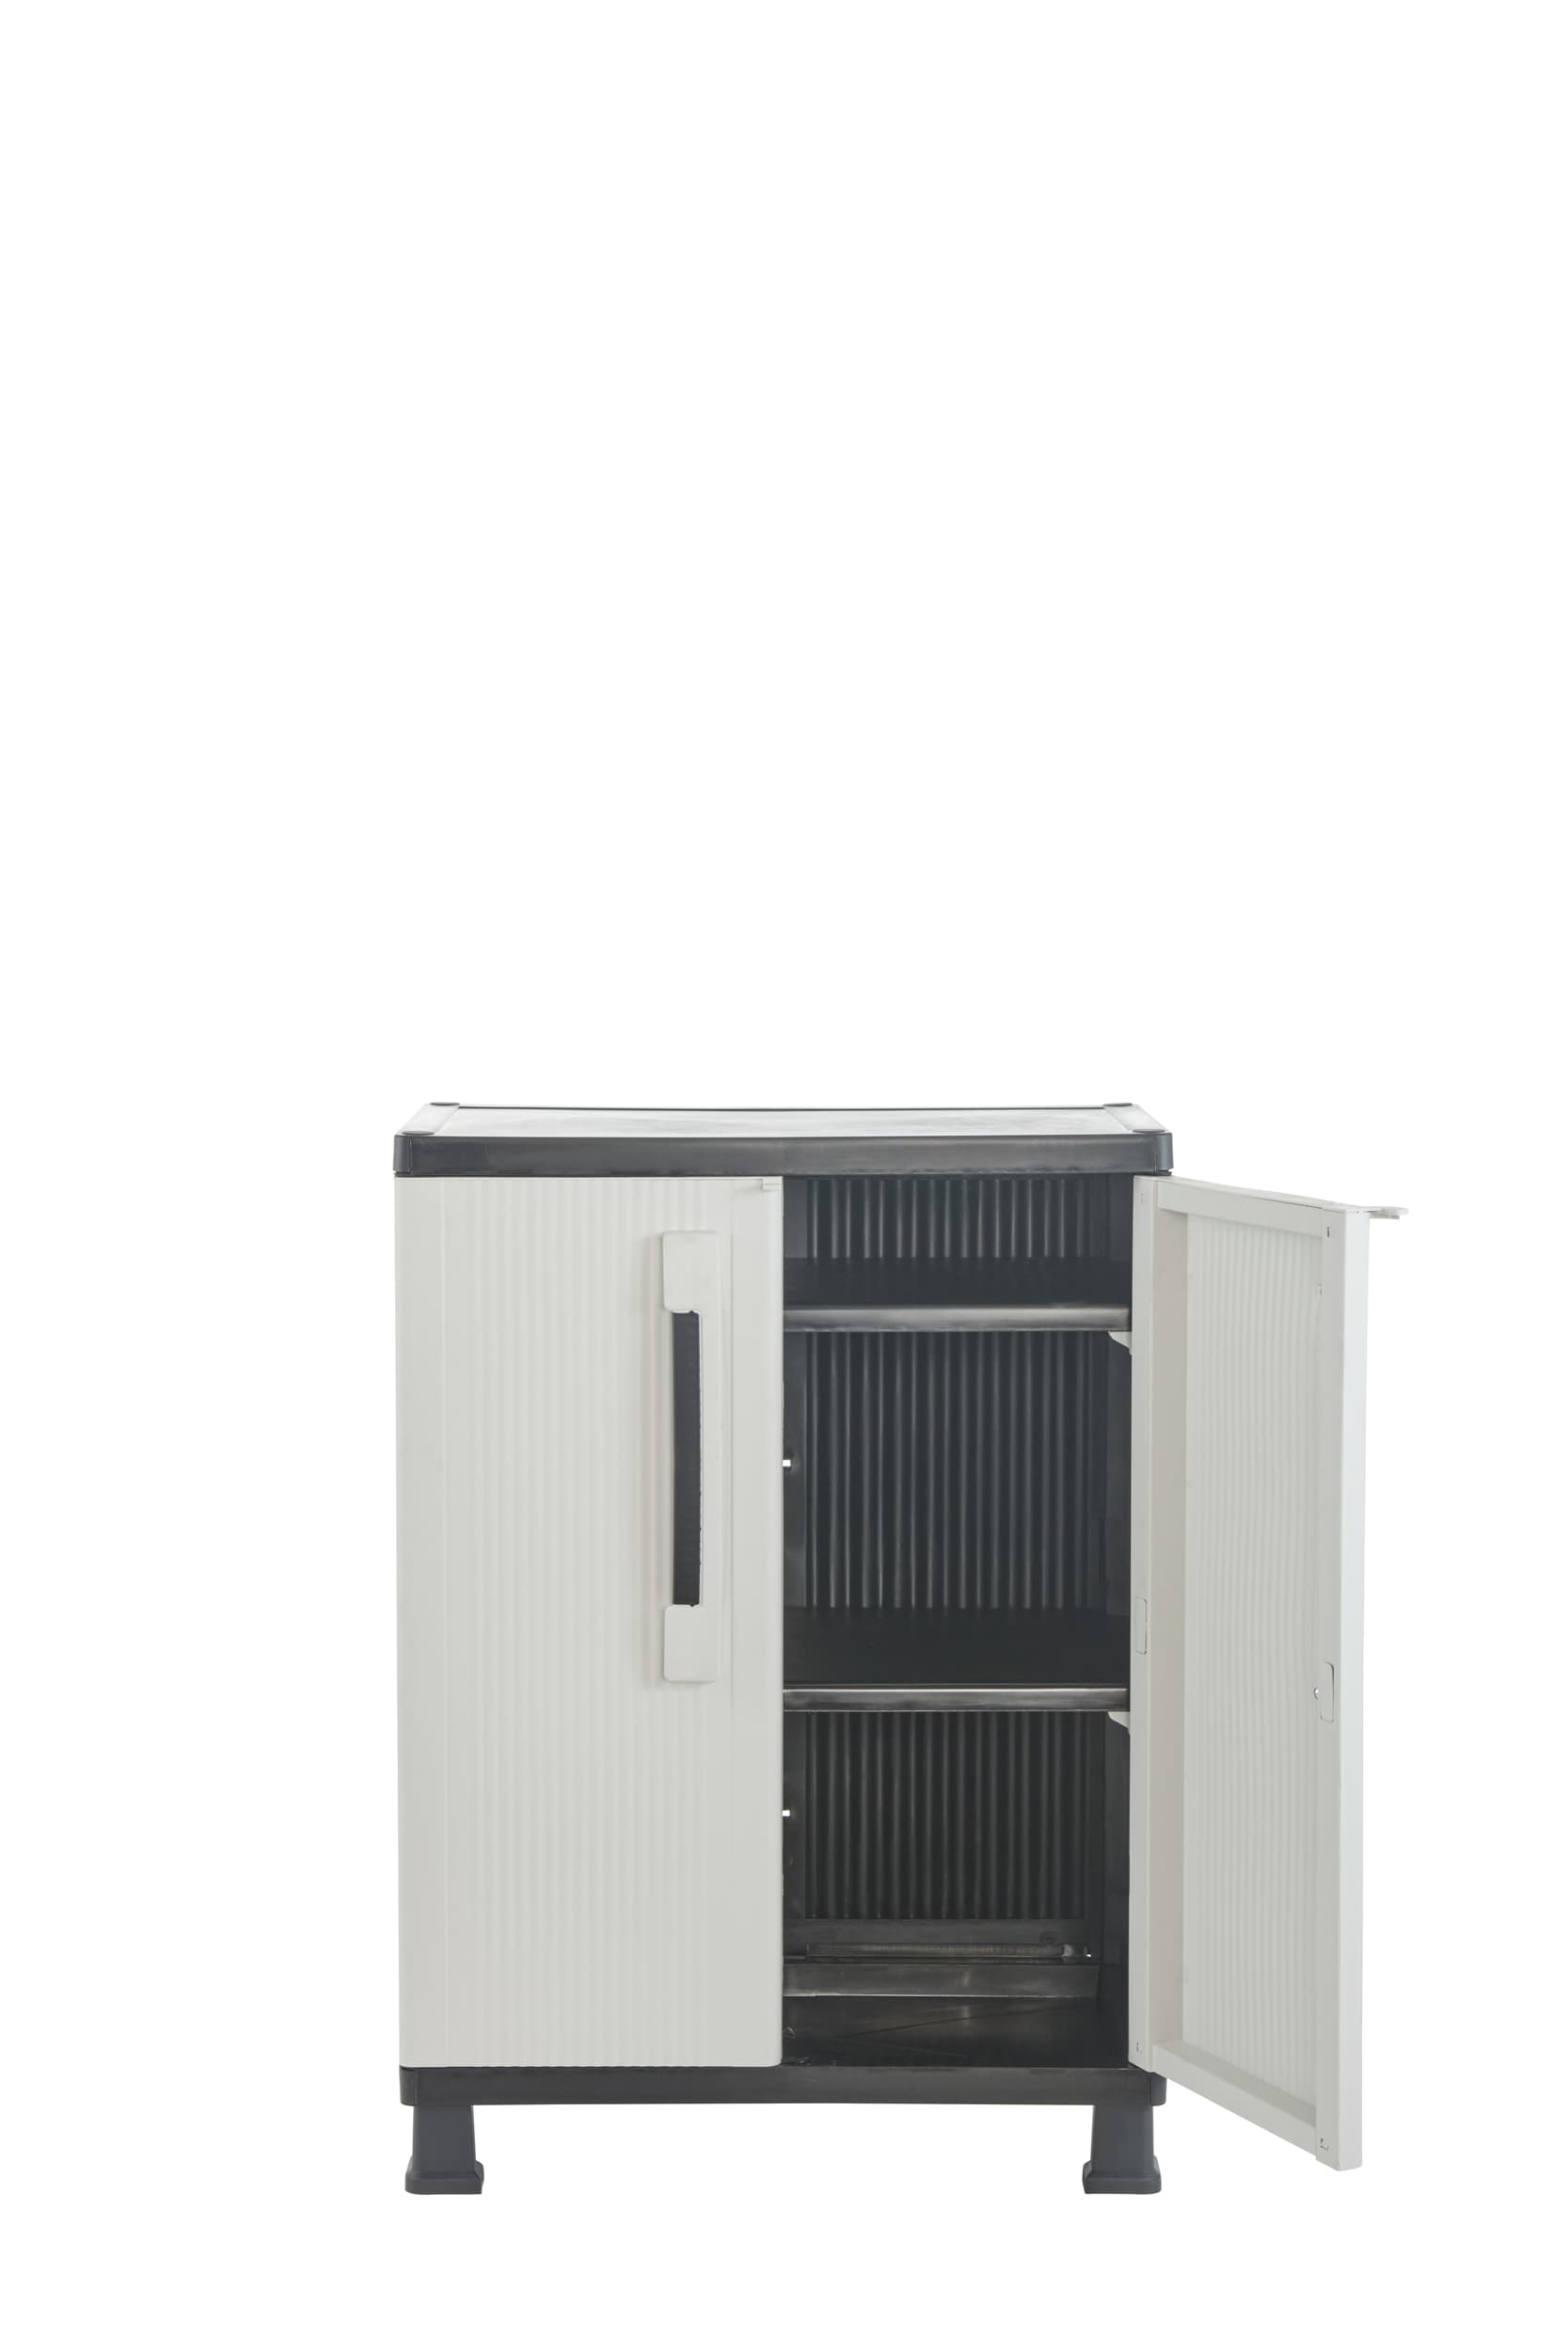 Keter Utility jumbo cabinet Plastic Freestanding Garage Cabinet in Gray  (34.5-in W x 70.8-in H x 17.5-in D) in the Garage Cabinets department at